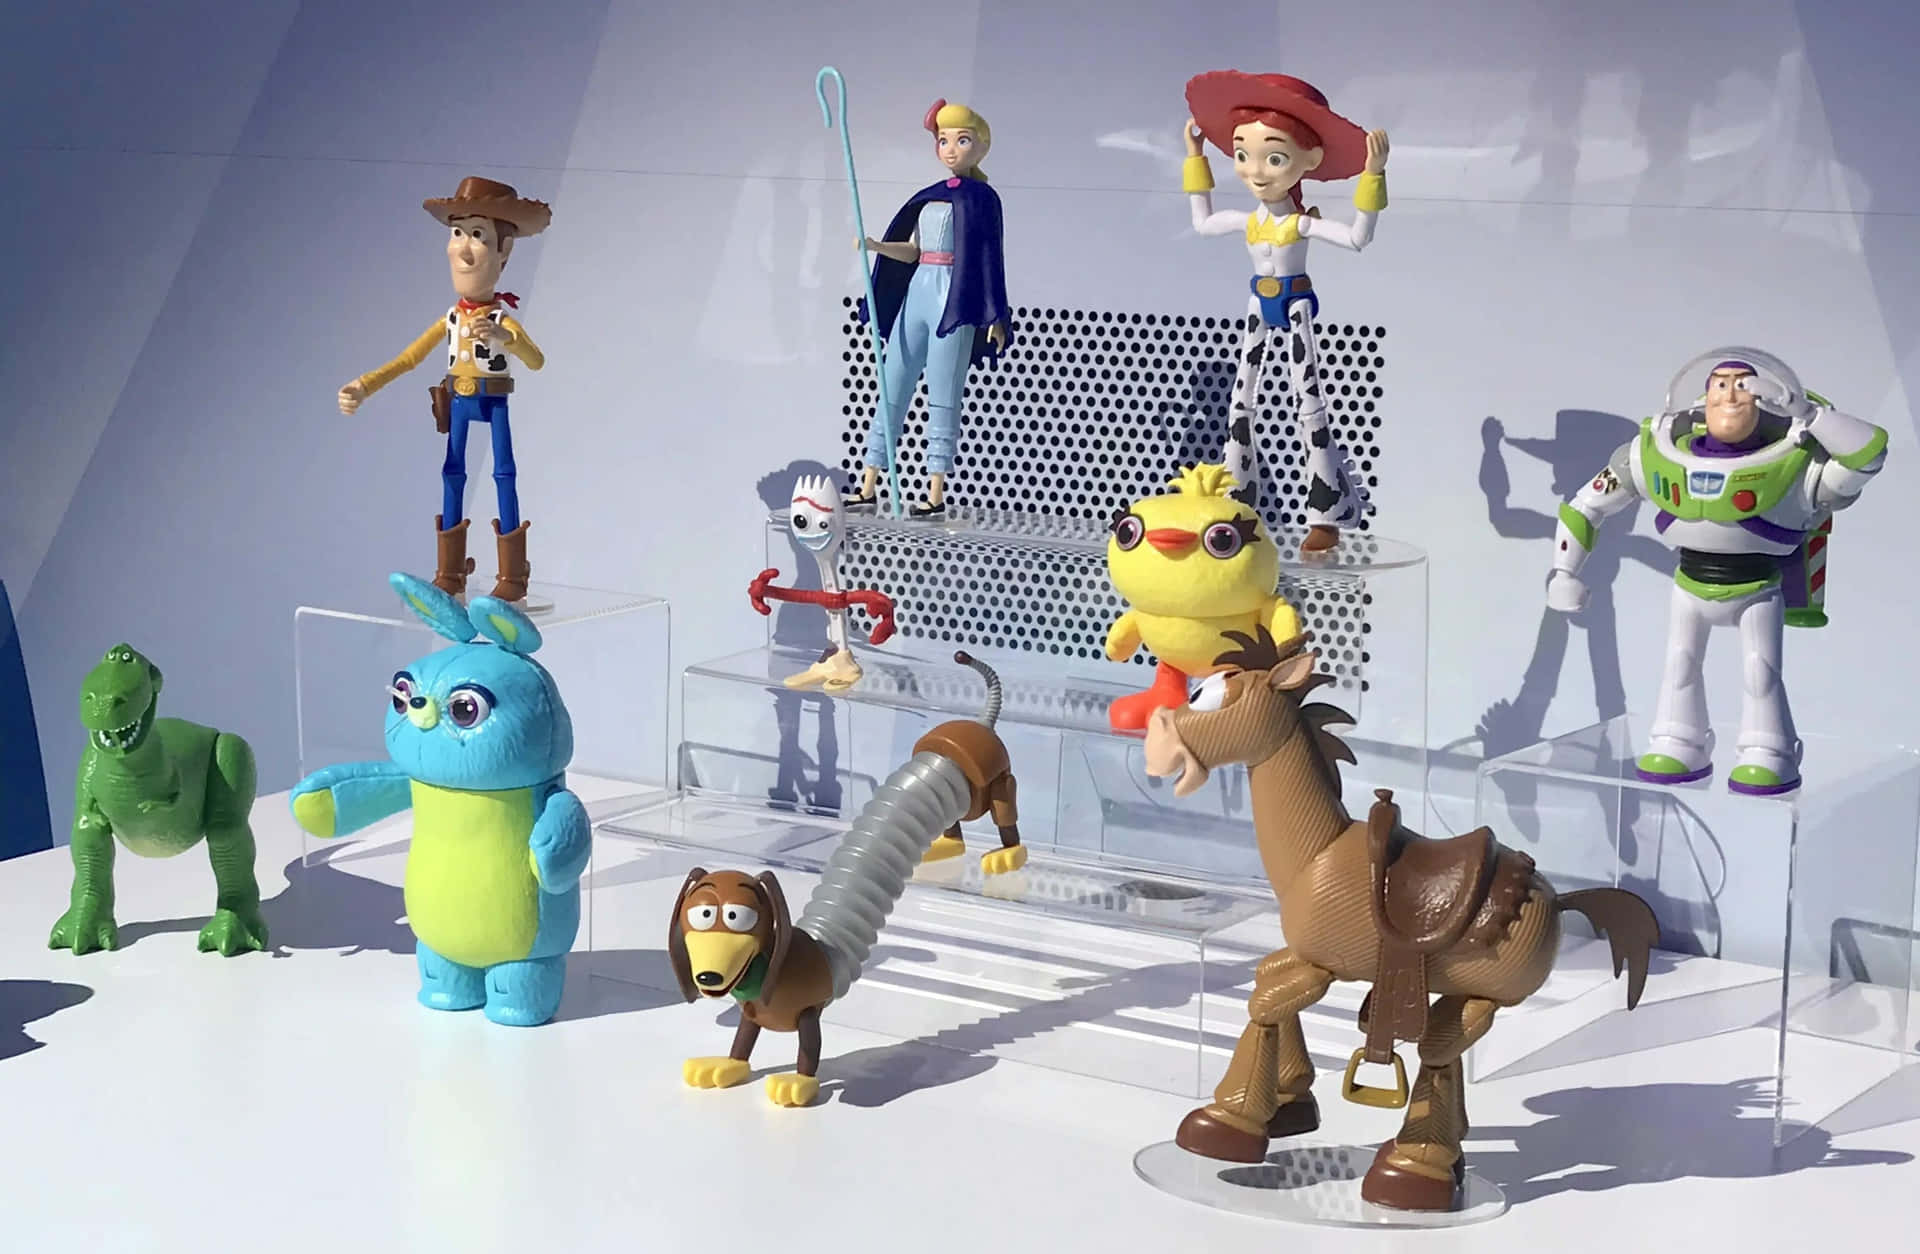 Adventure Awaits in Toy Story 4